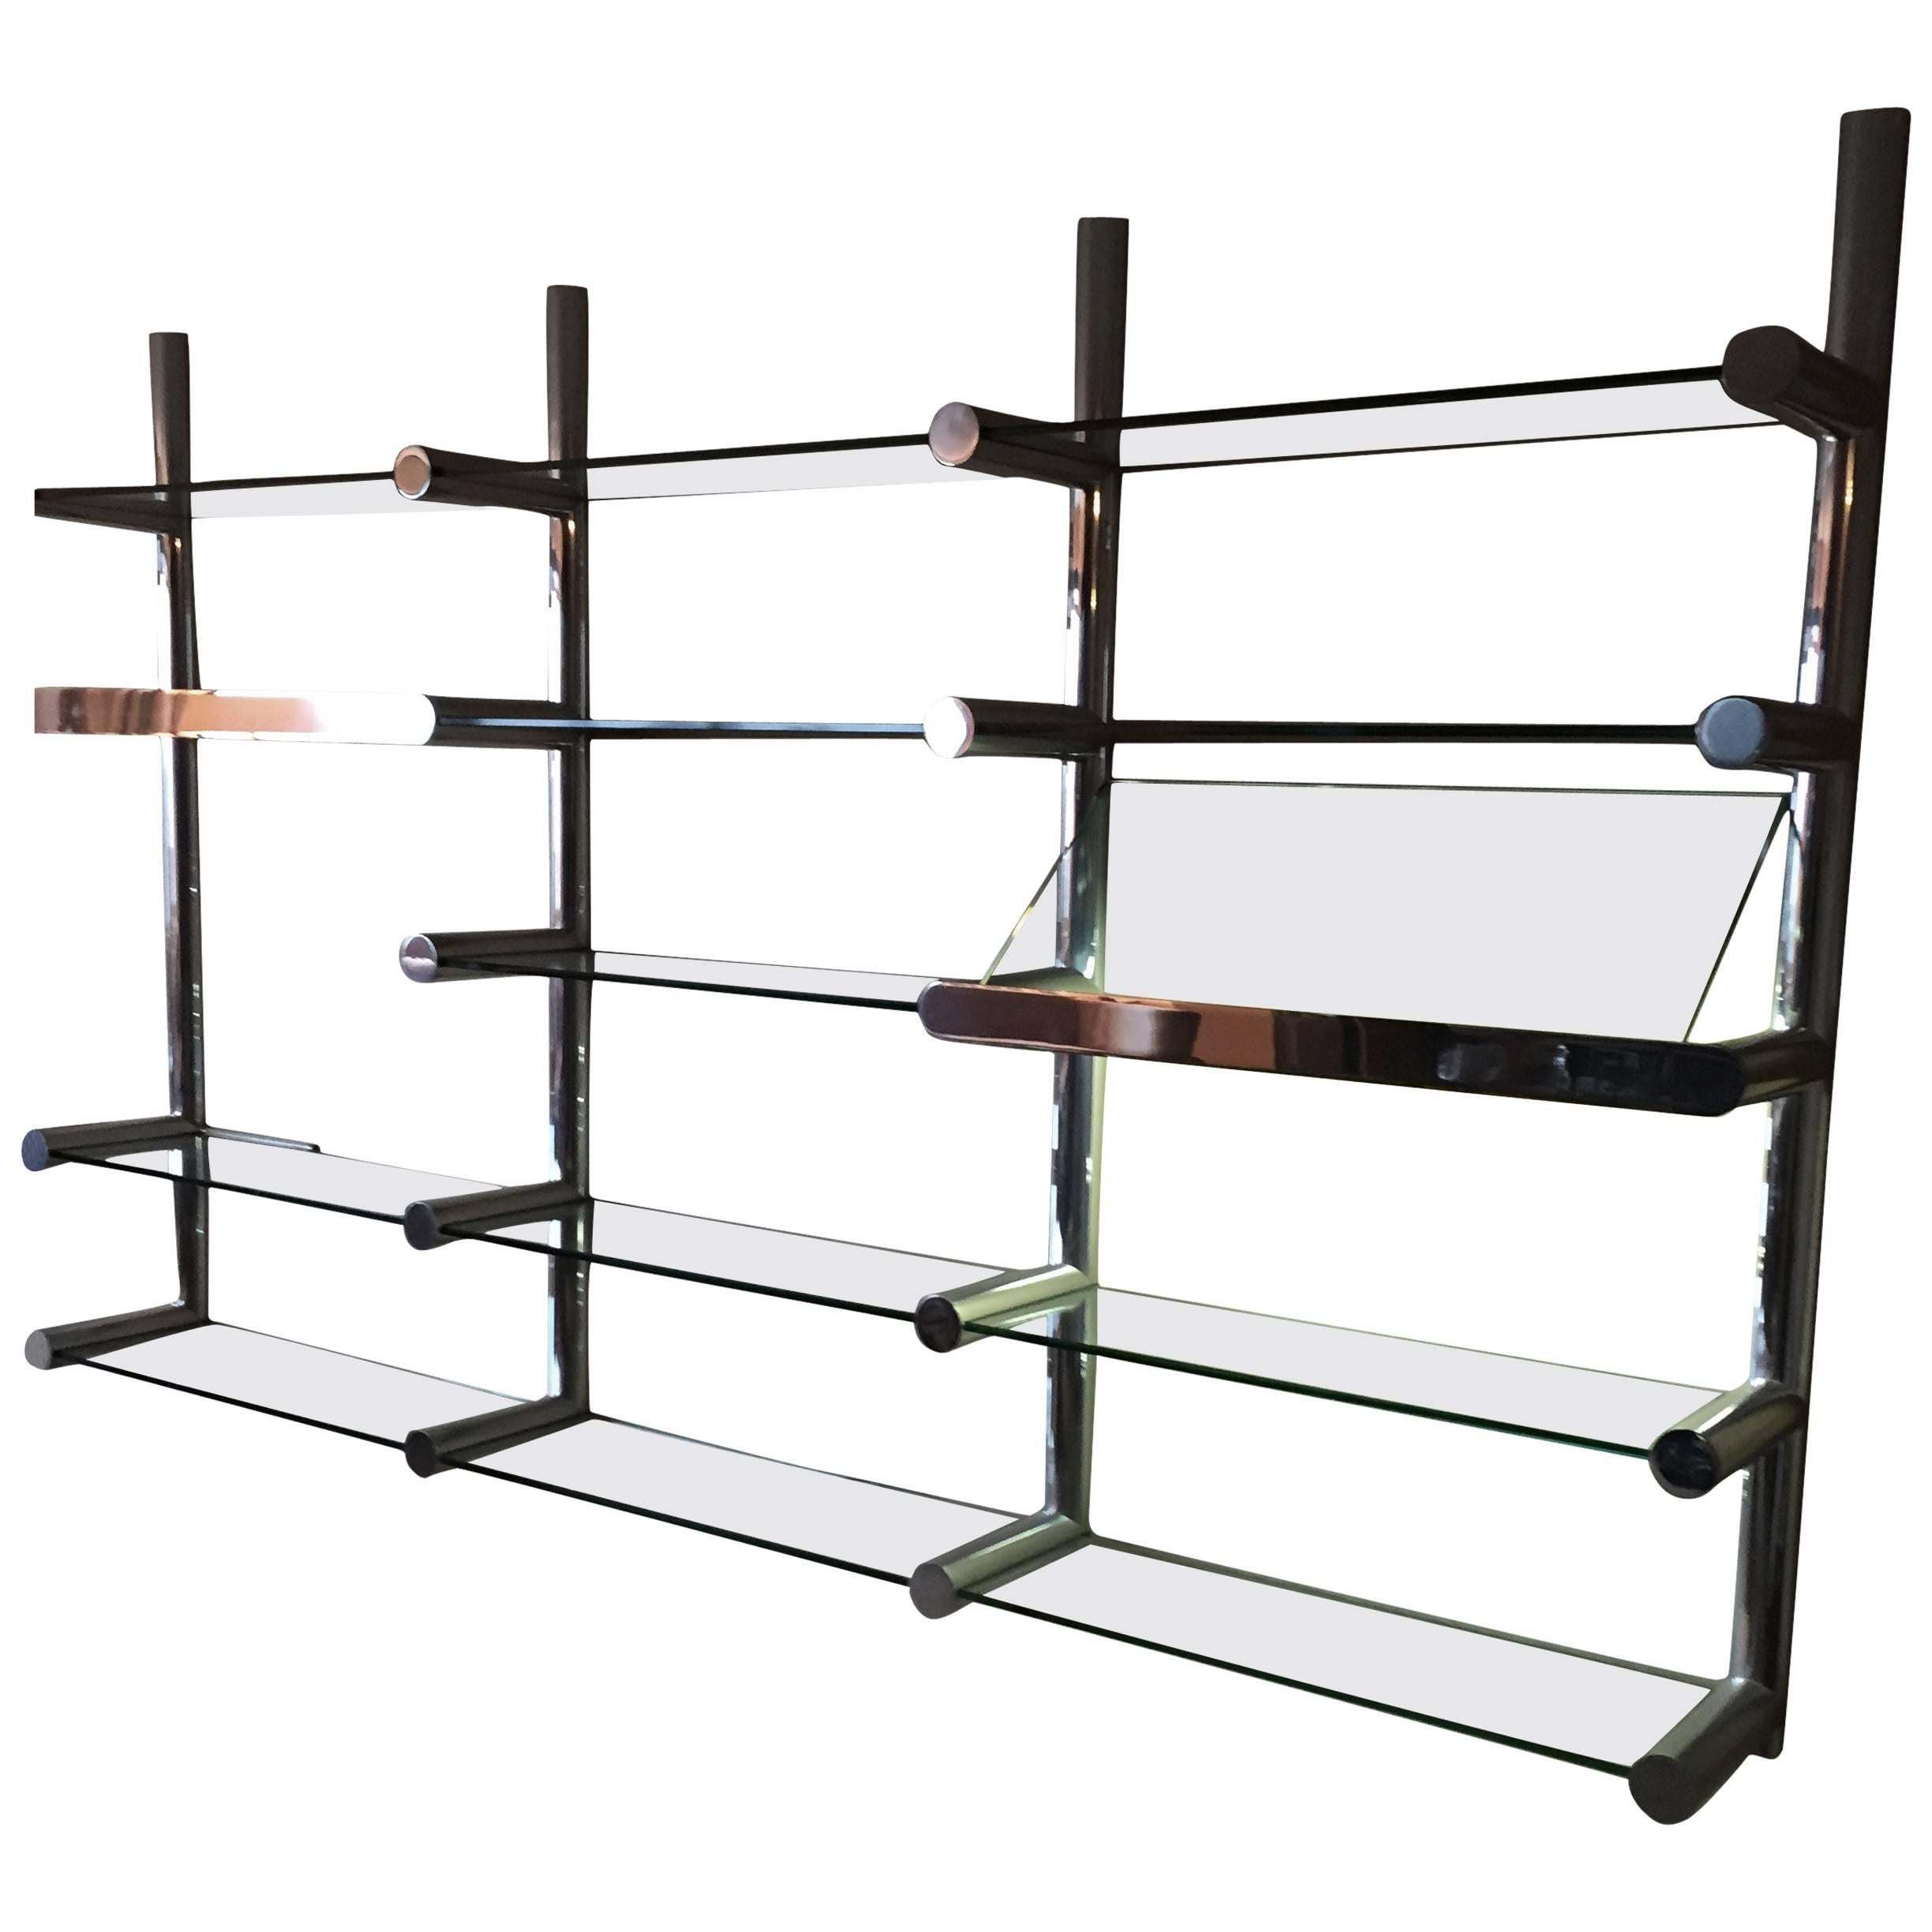 Orba Shelving System by Janet Schwietzer for Pace Collection 1970's